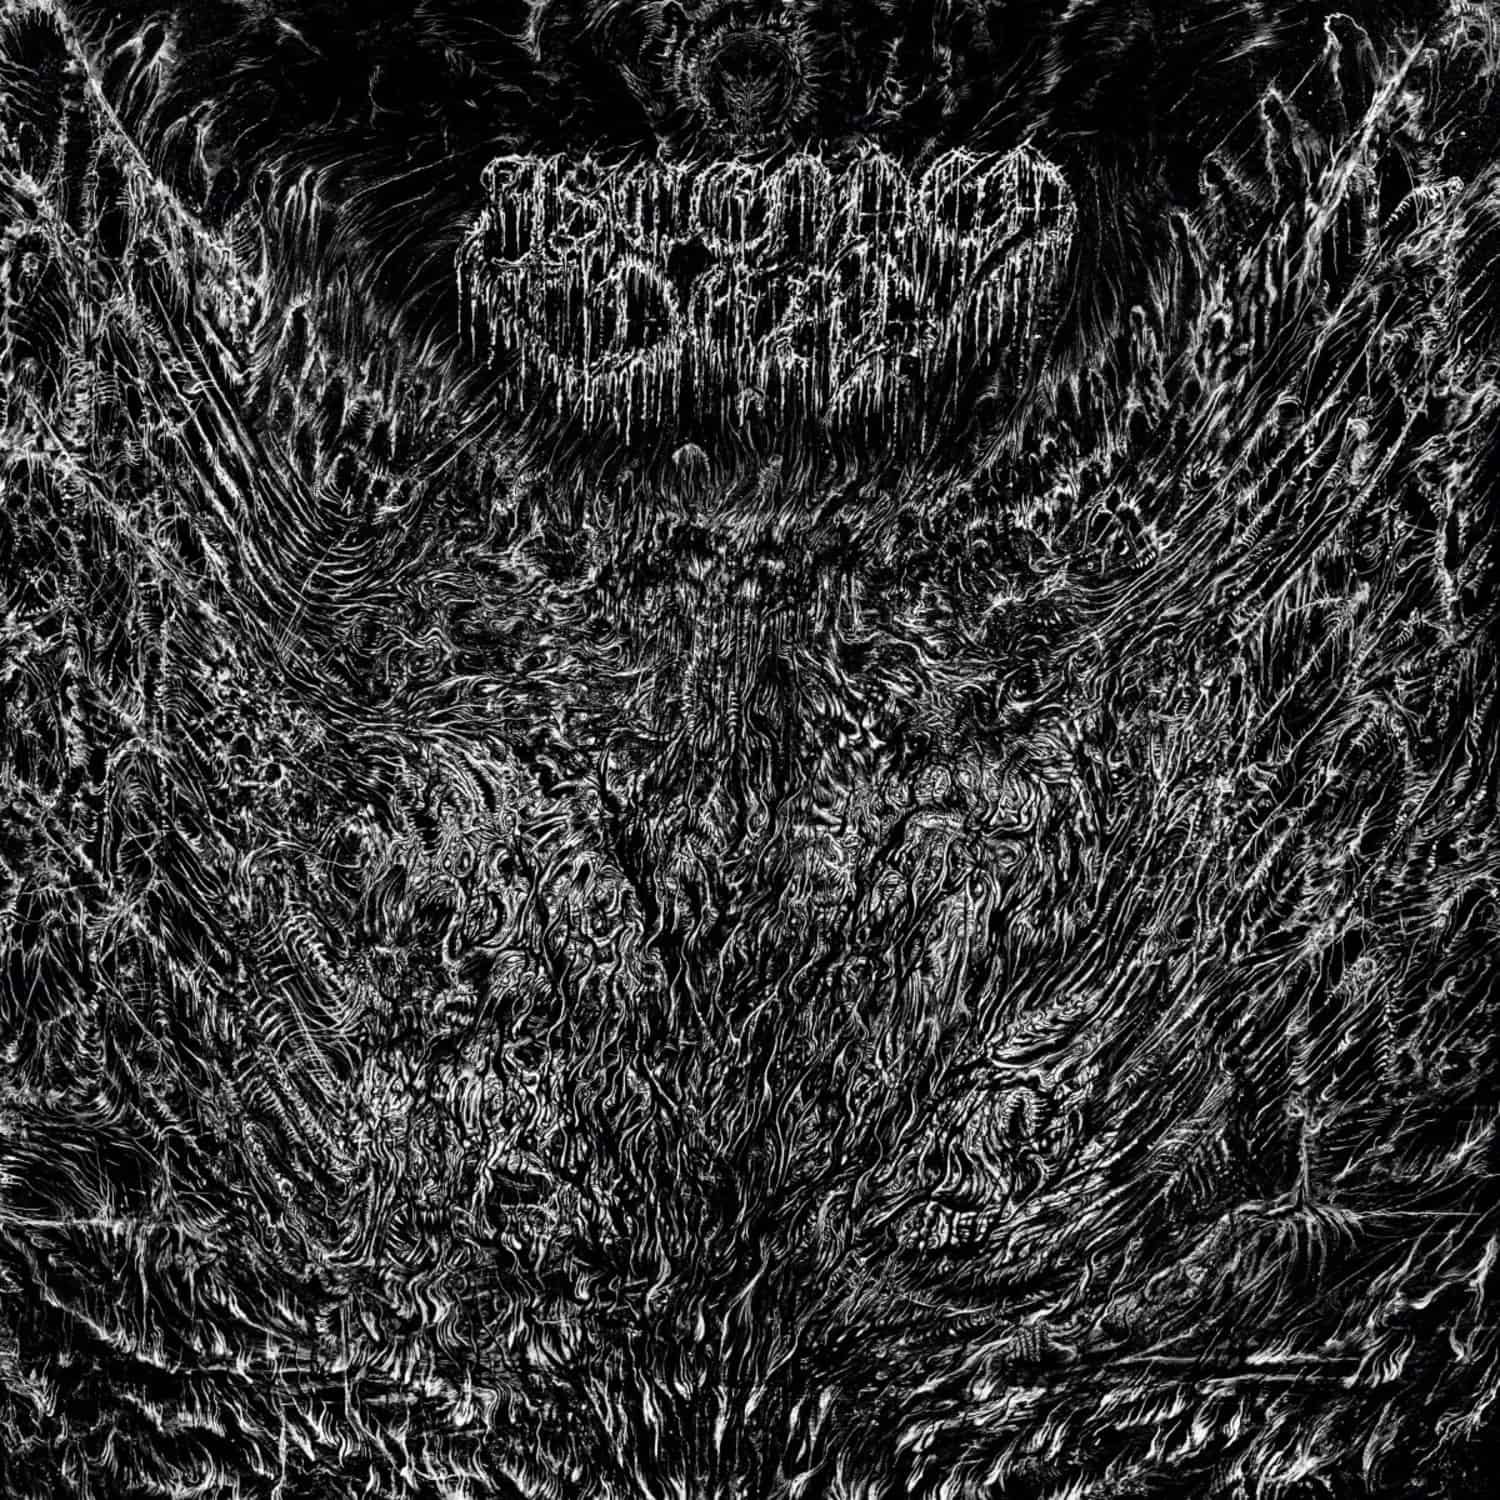 Ascended Dead - BESTIAL DEATH METAL 